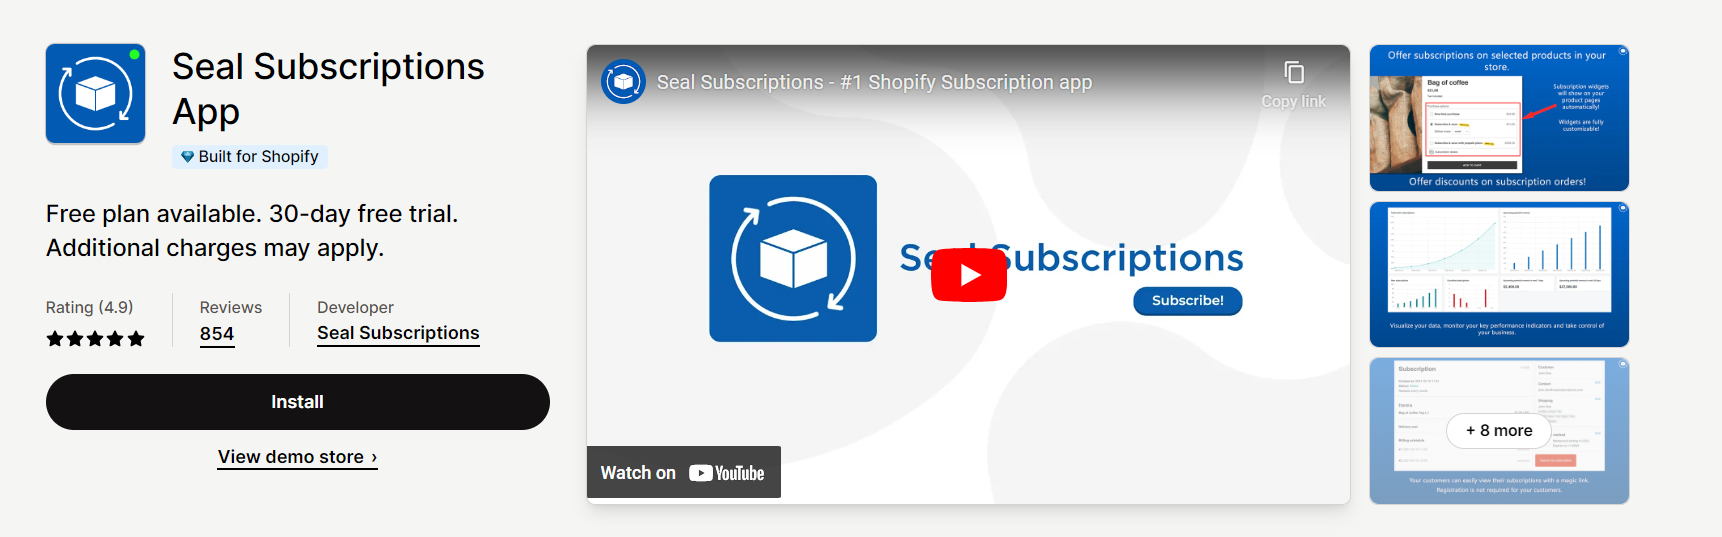 Seal Subscriptions